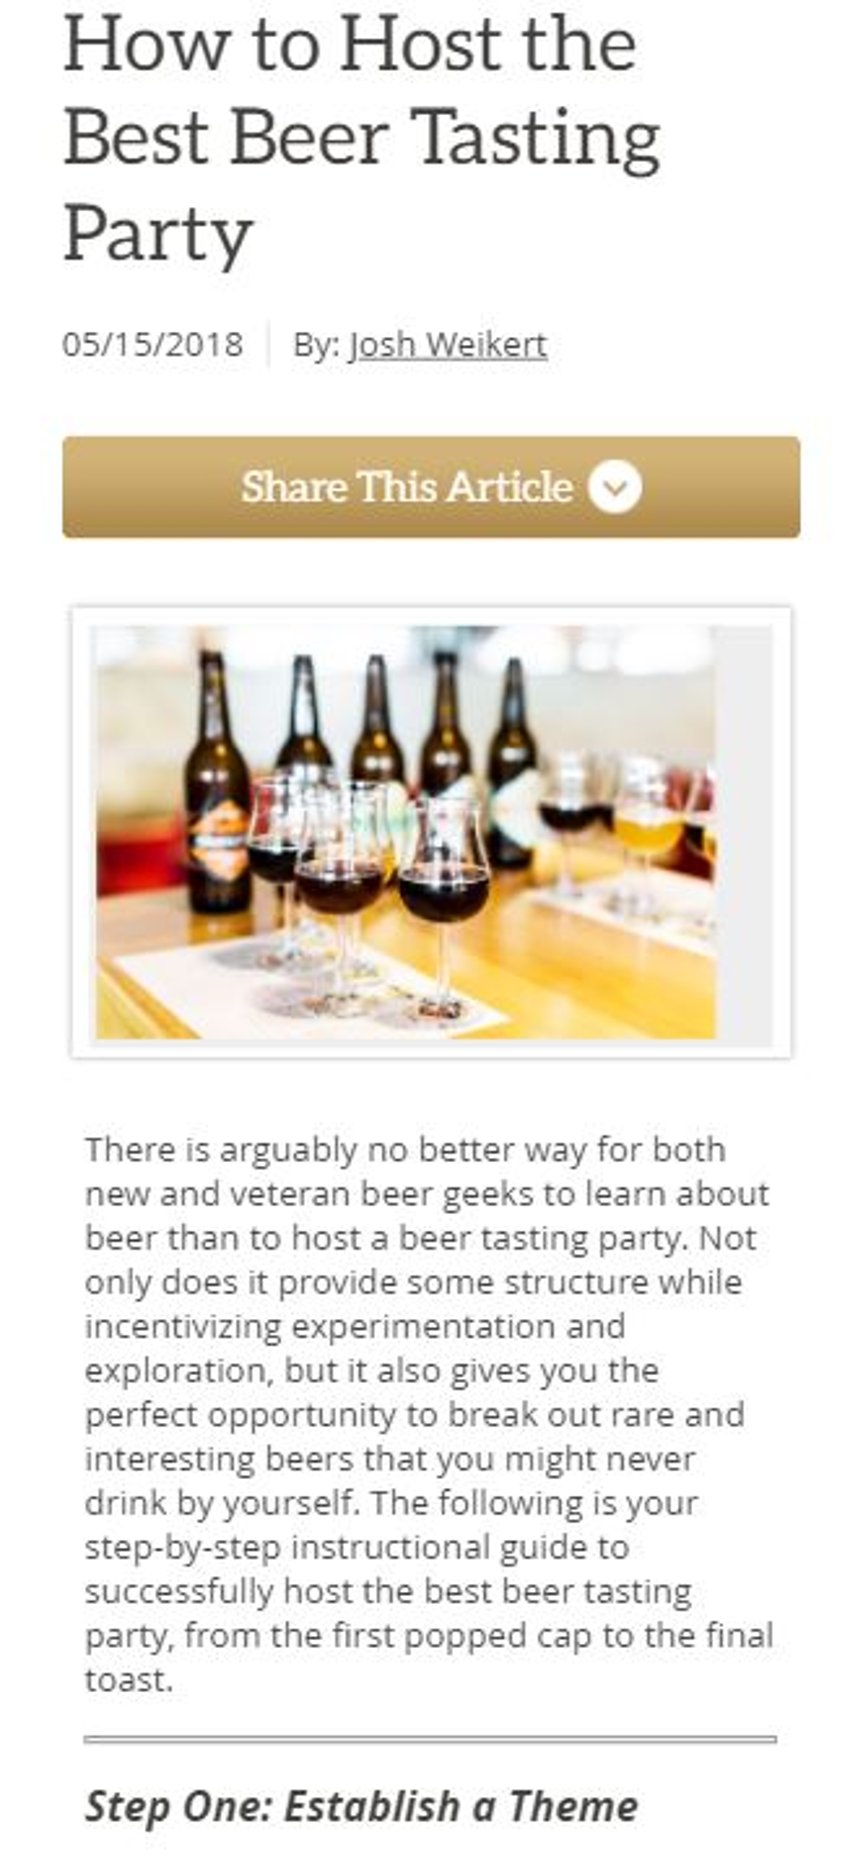 check out the full post [here](https://beerconnoisseur.com/articles/how-host-best-beer-tasting-party)